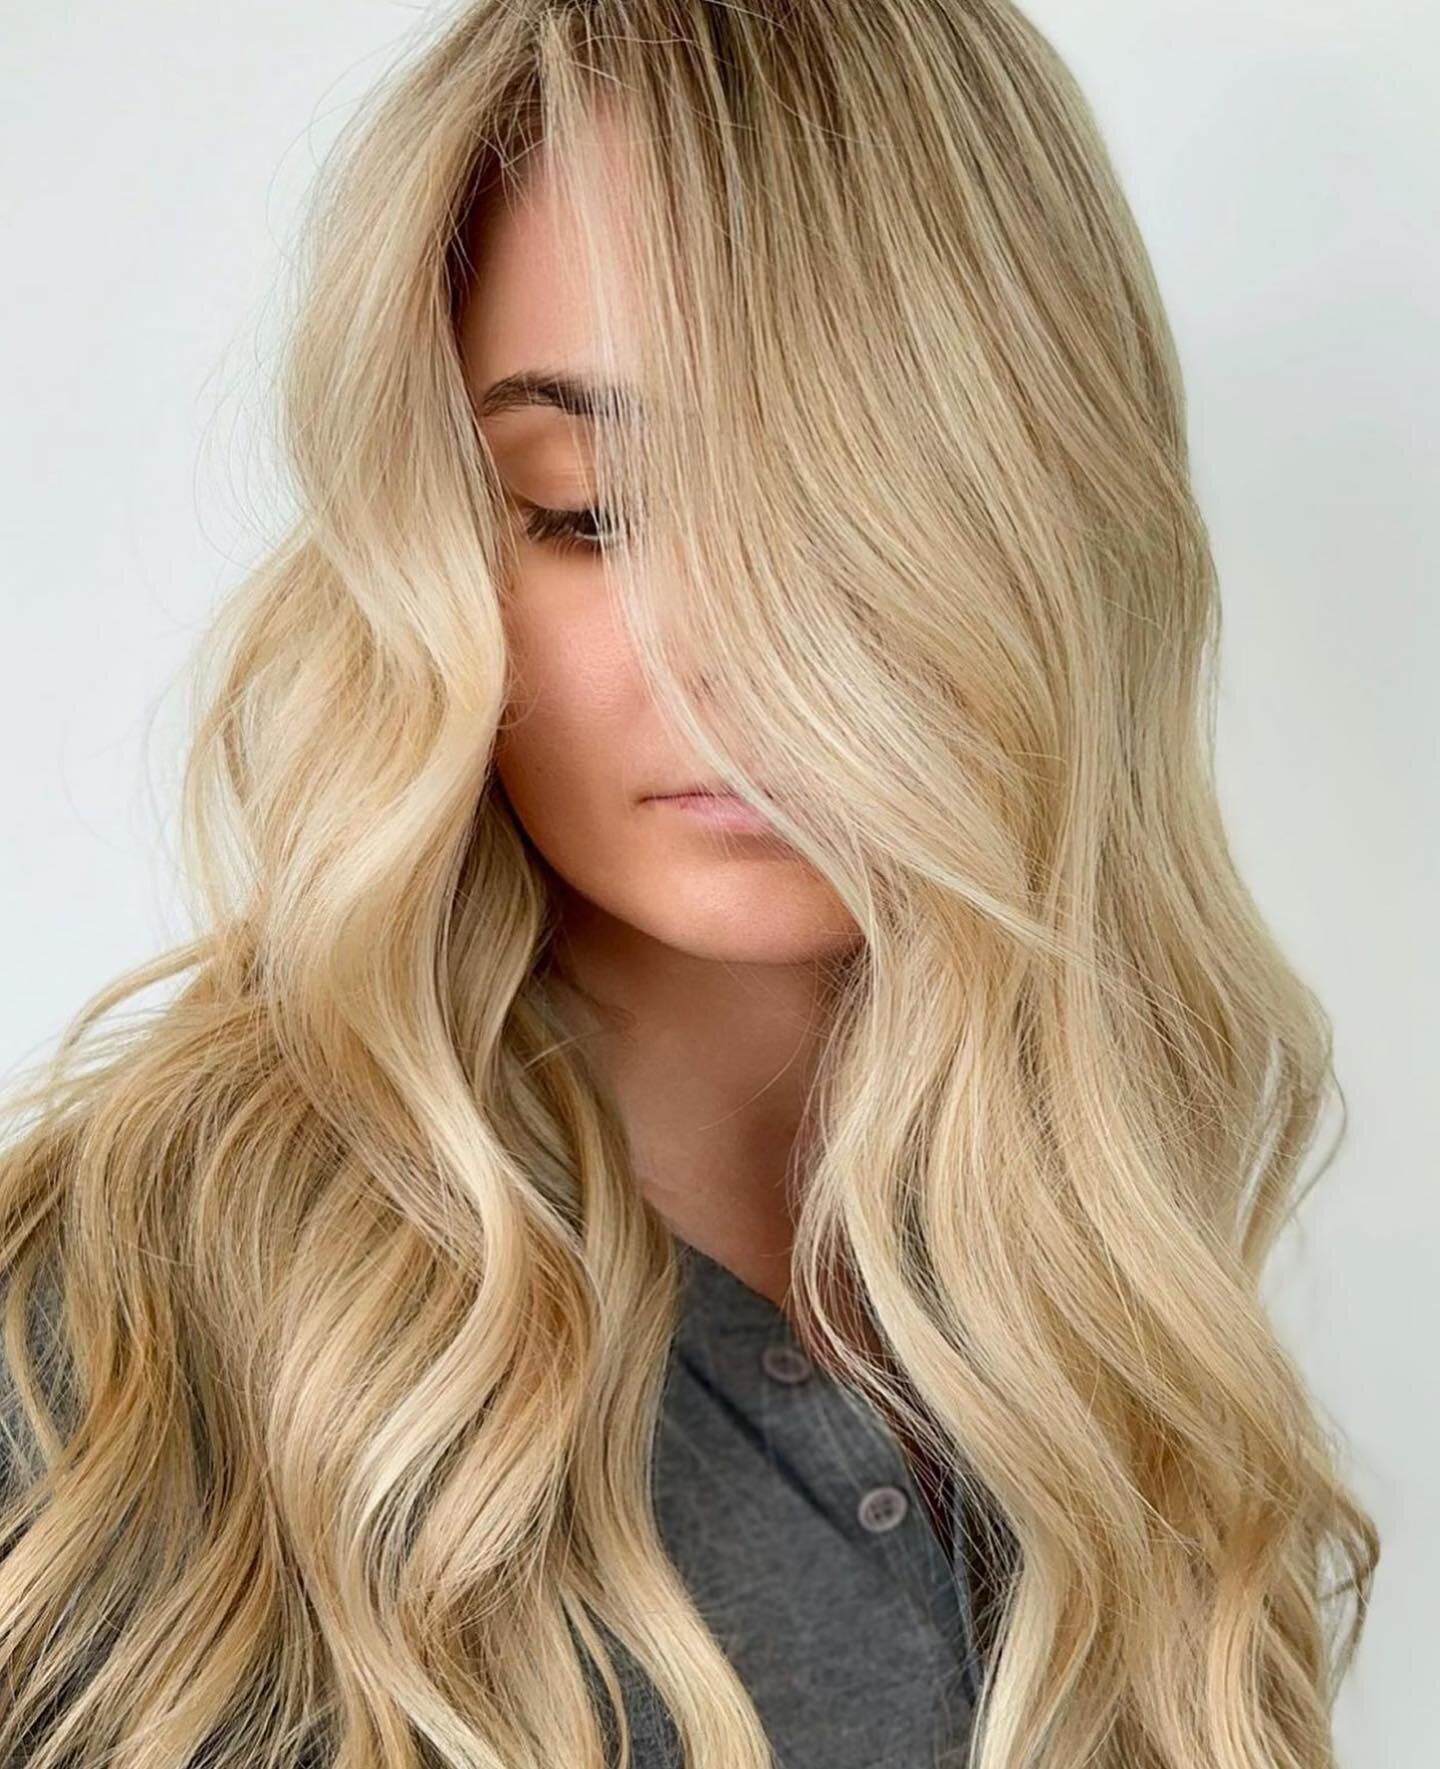 Wedding-ready blonde by @shyerchristine ✨ 

Link in bio to book at The Blake Denver! As always, consultations are free! 🤩

Christmas in July raffle is ongoing for new clients! 
.
.
.
#denverhairstylist #denverhairsalon #denverhair #denvercolorist #d